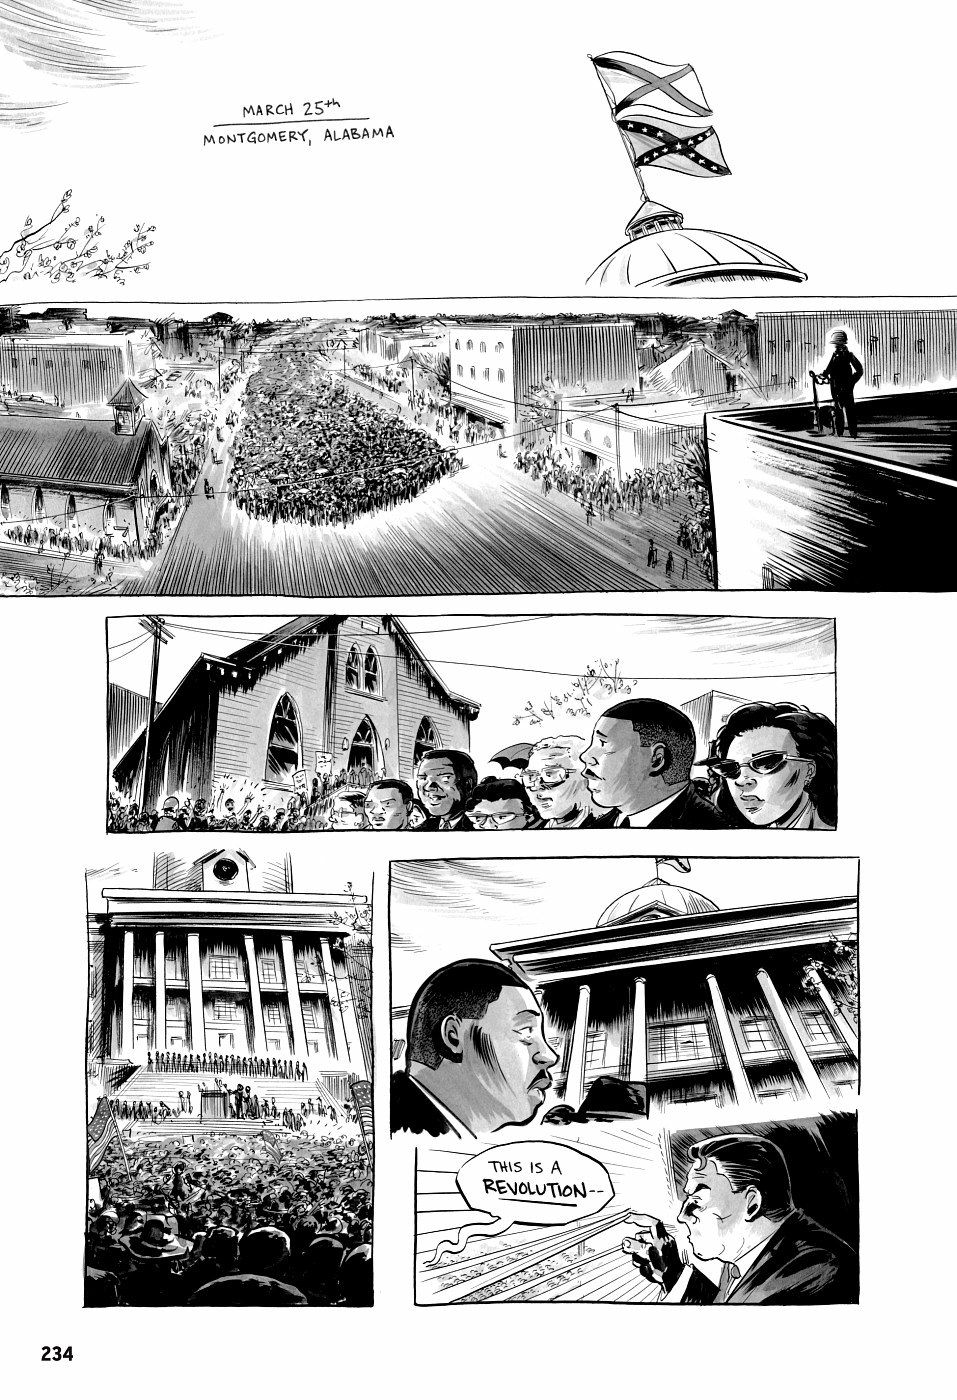 page 234 of march book three graphic novel